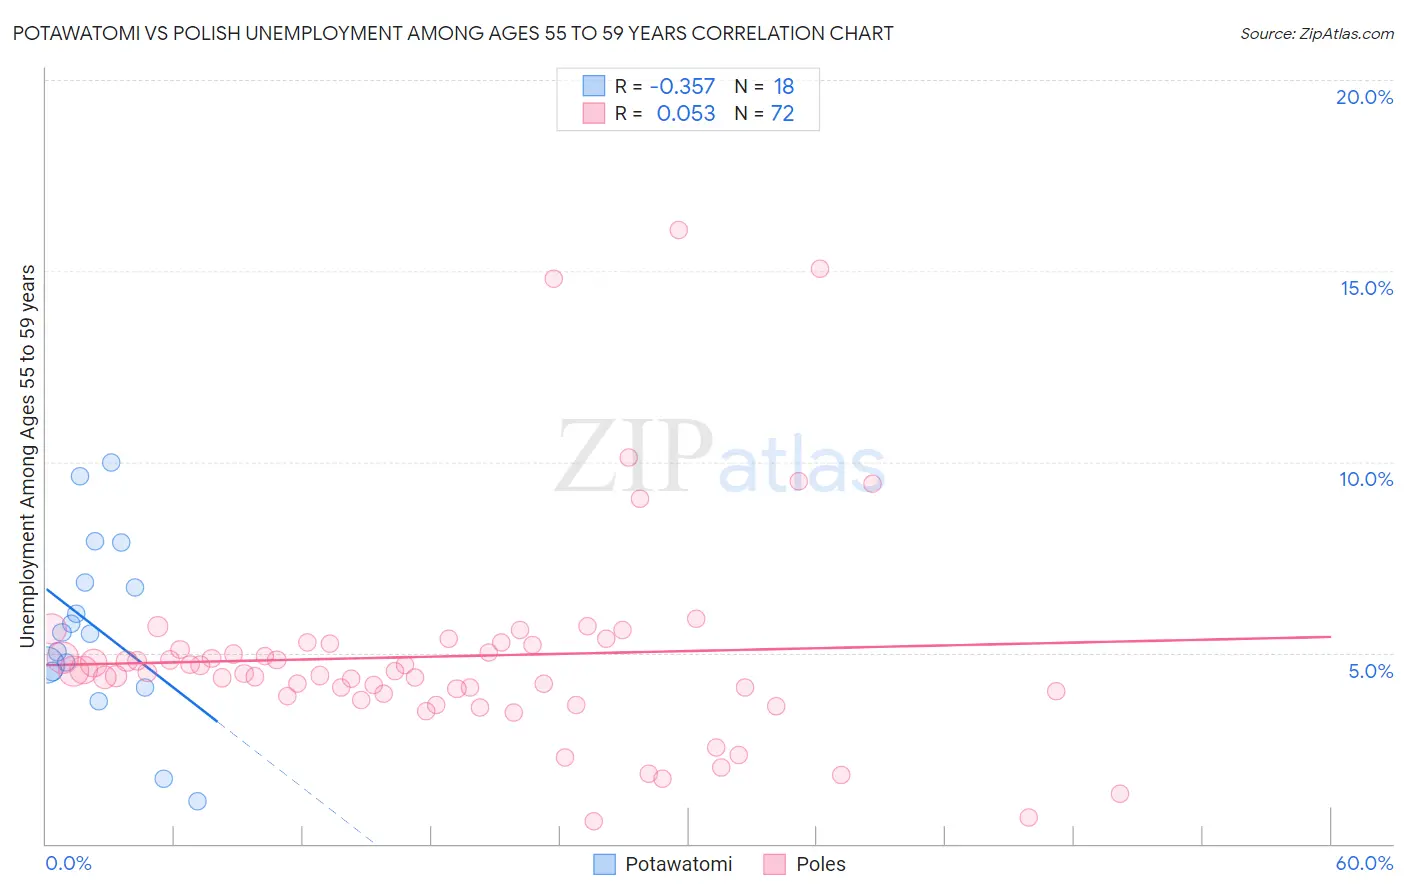 Potawatomi vs Polish Unemployment Among Ages 55 to 59 years